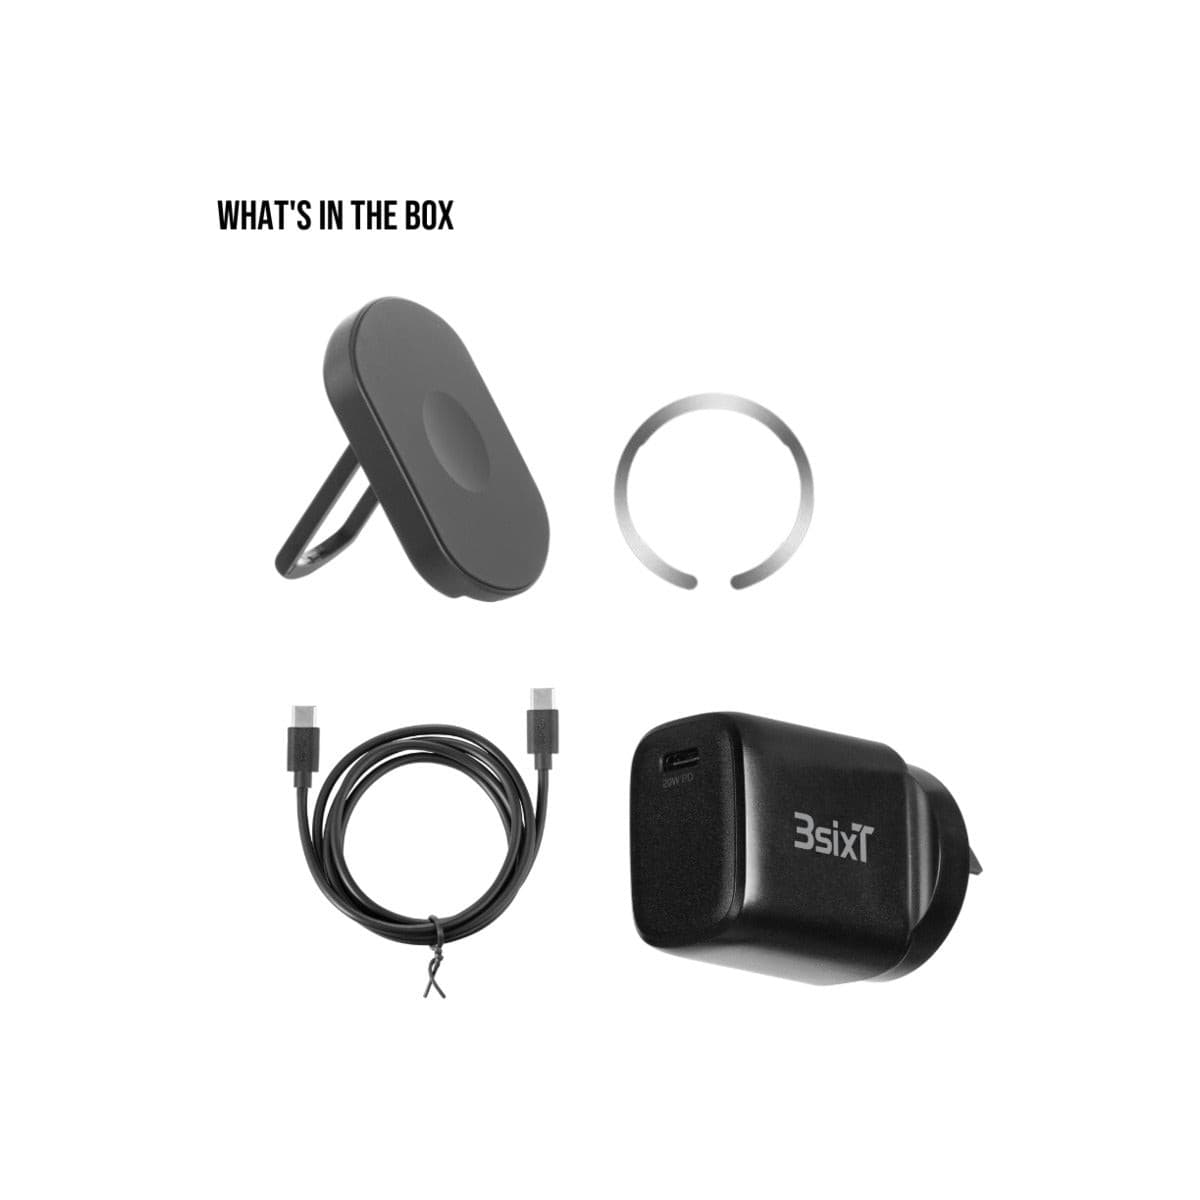 3sixT All In 1 MagSafe Charger + 20W Wall Charger - Black.